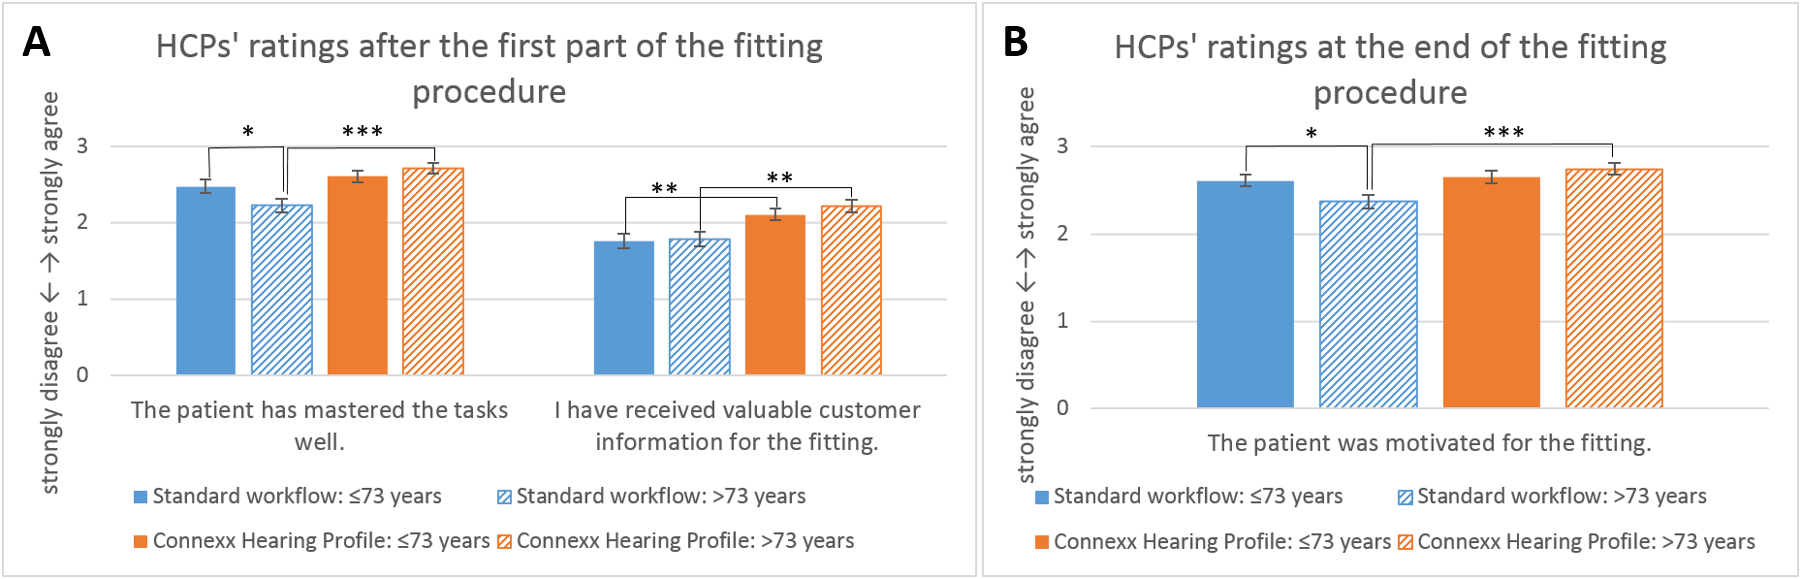 HCPs‘ ratings on their patients in both fitting workflows depending on the patient’s age